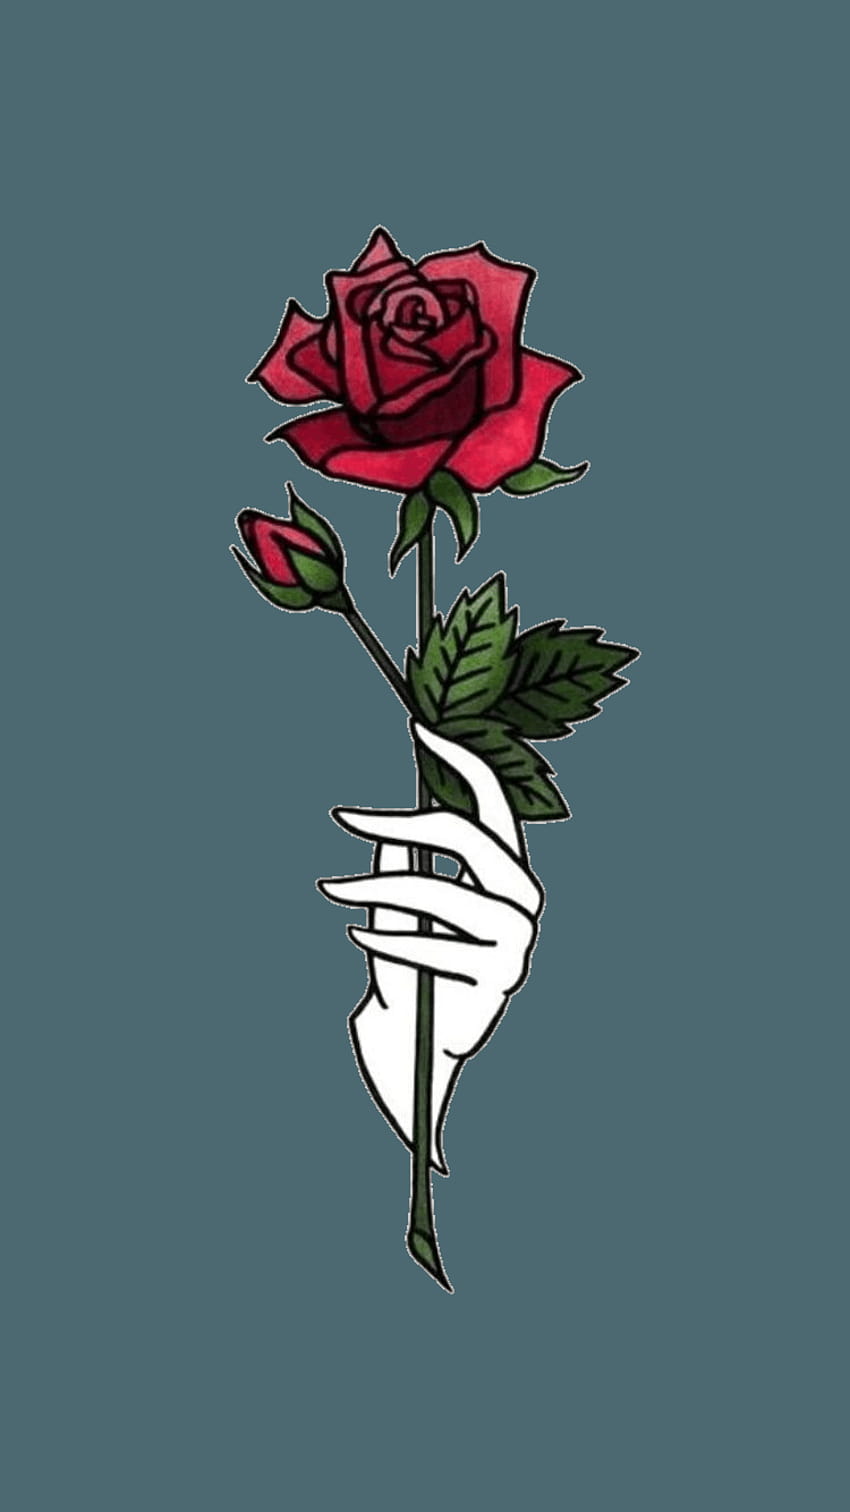 Discover the coolest, aesthetic rose HD phone wallpaper